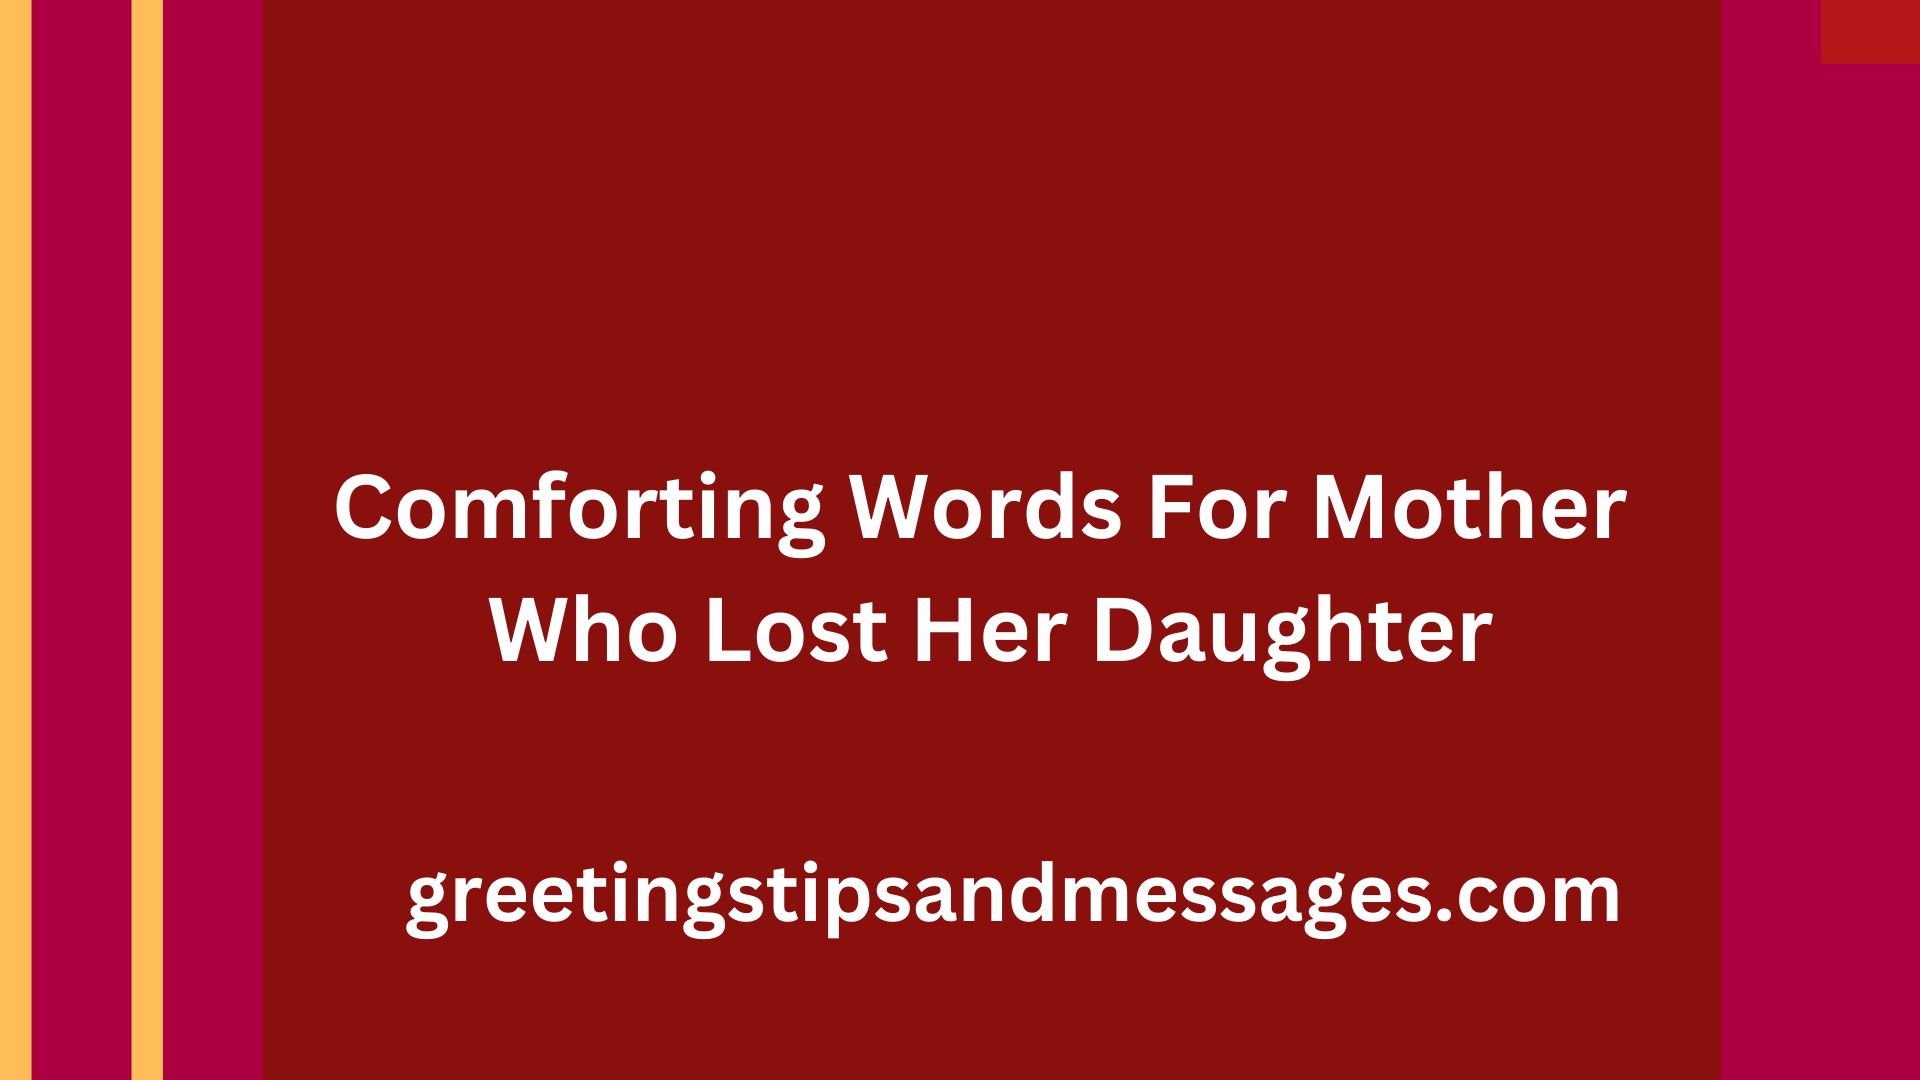 Comforting Words For A Mother Who Lost Her Daughter